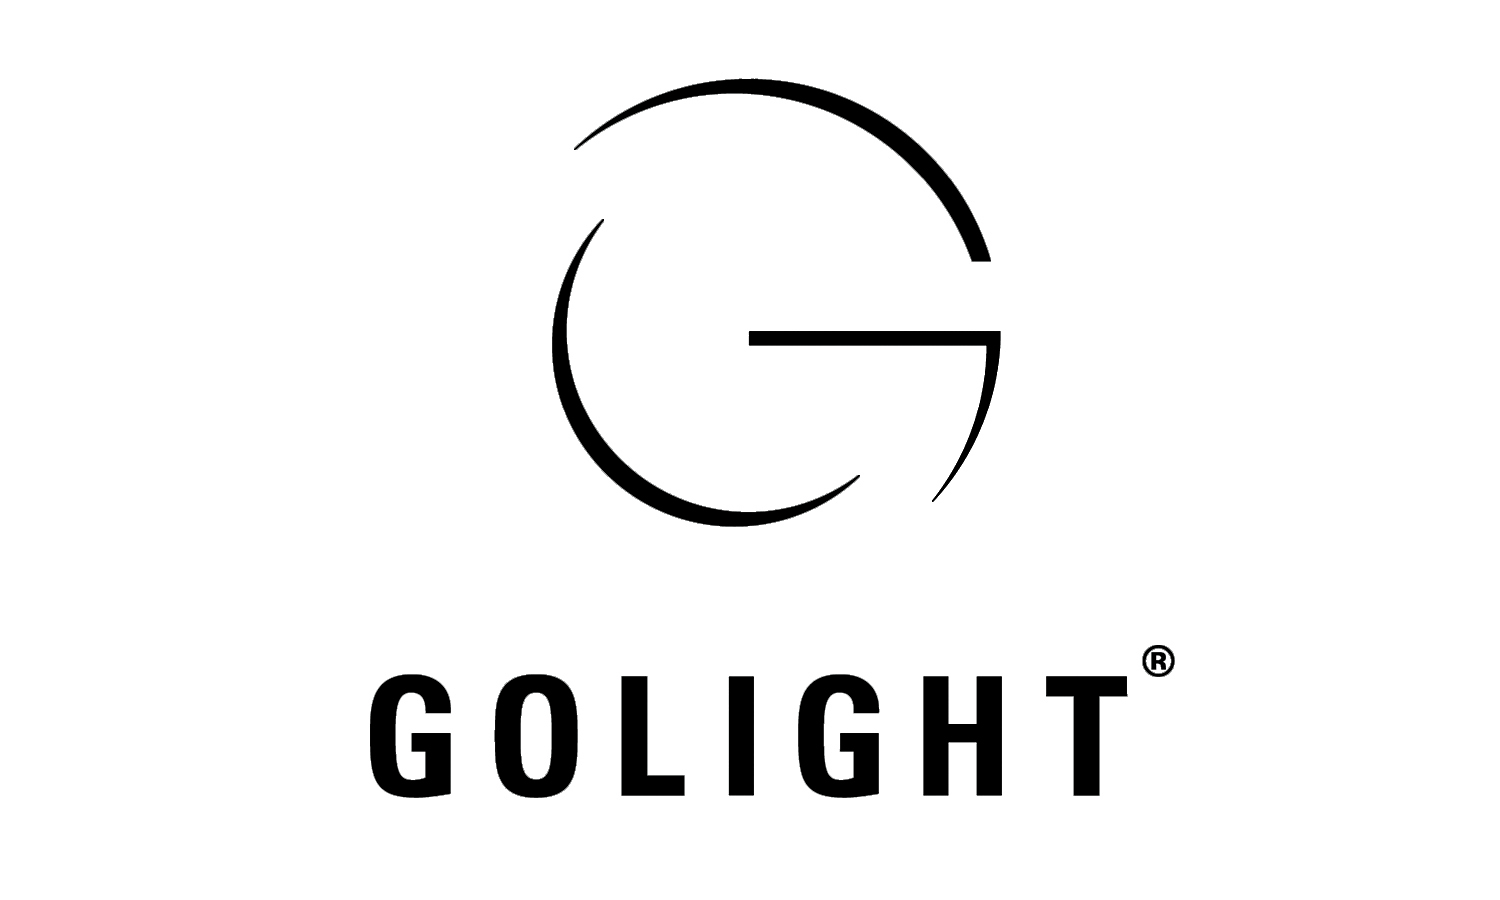 Golight, Inc. is a world leader in pan-and-tilt remote-controlled lighting technology